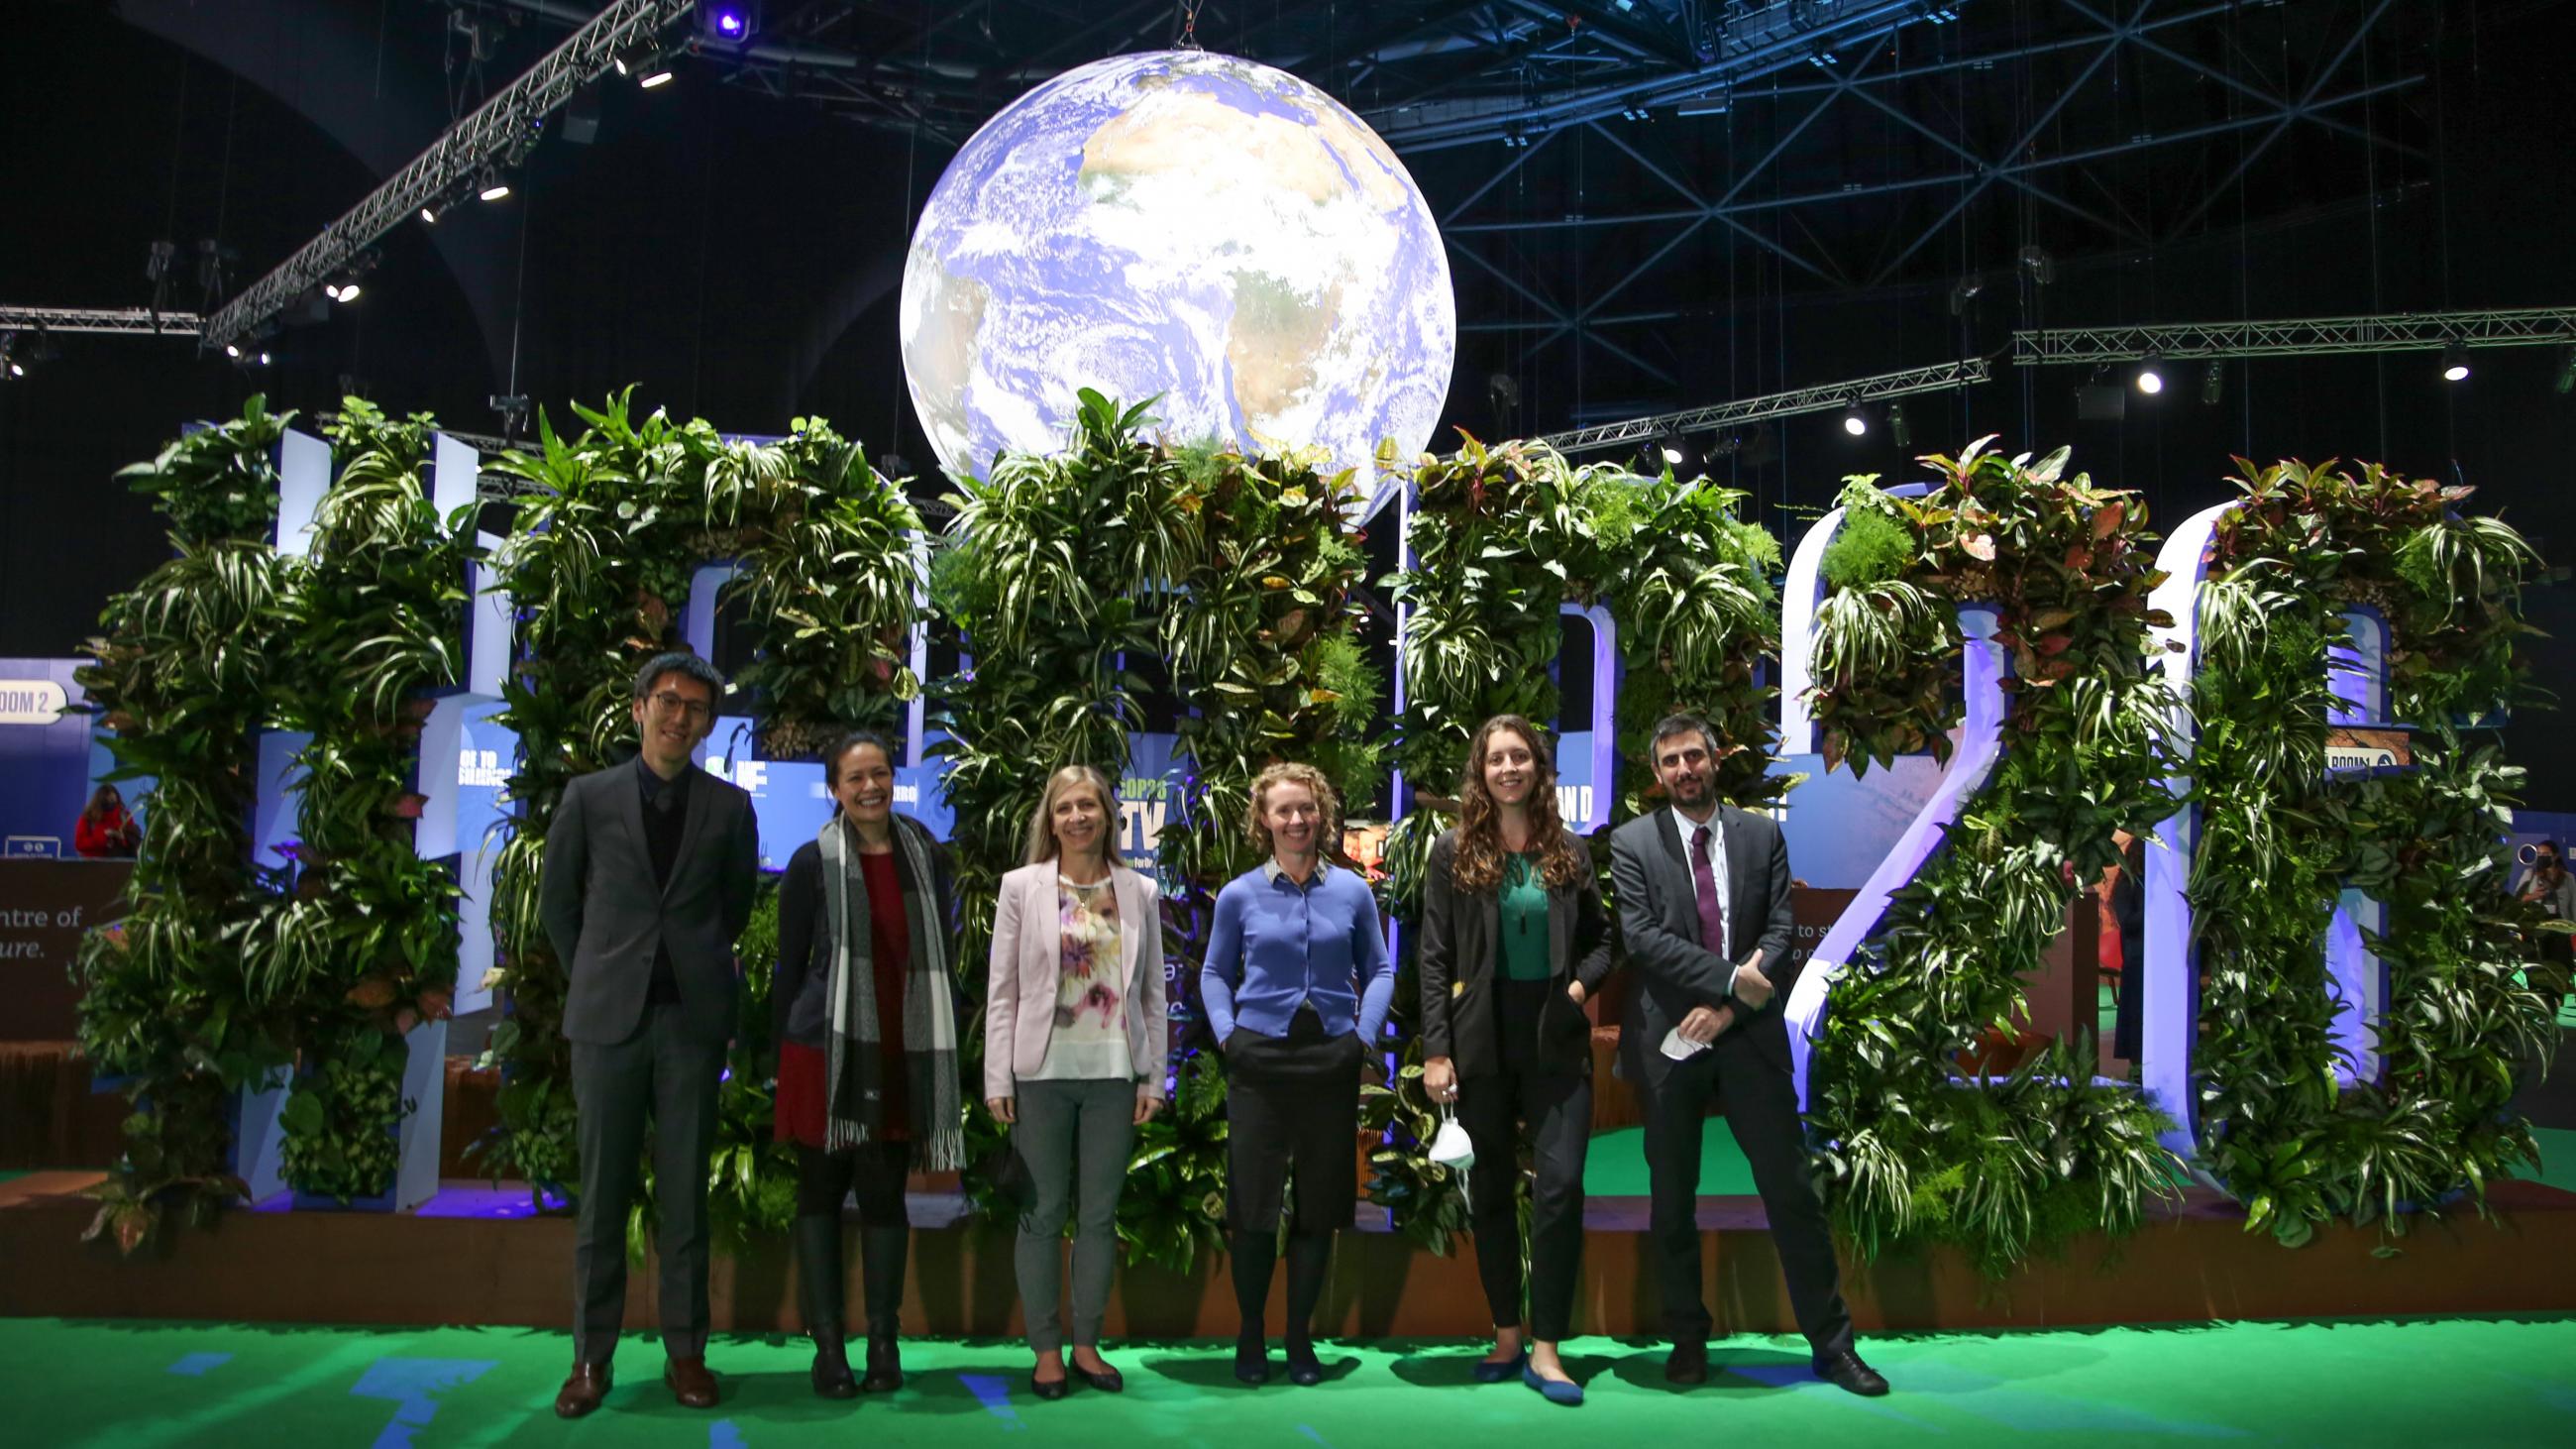 A team photo of the ENB members present at COP26